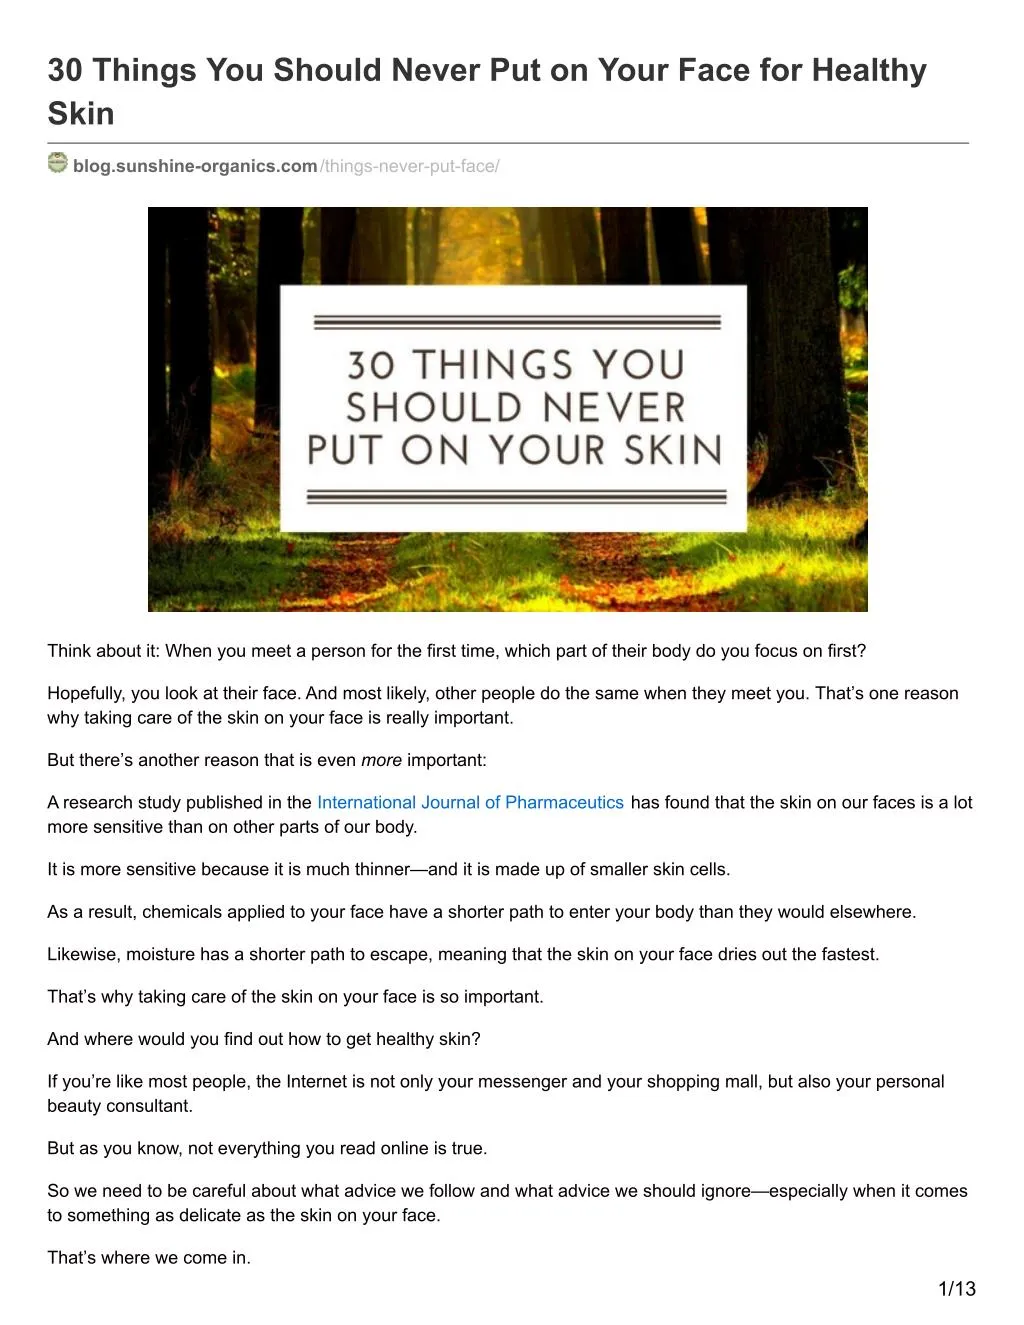 30 things you should never put on your face